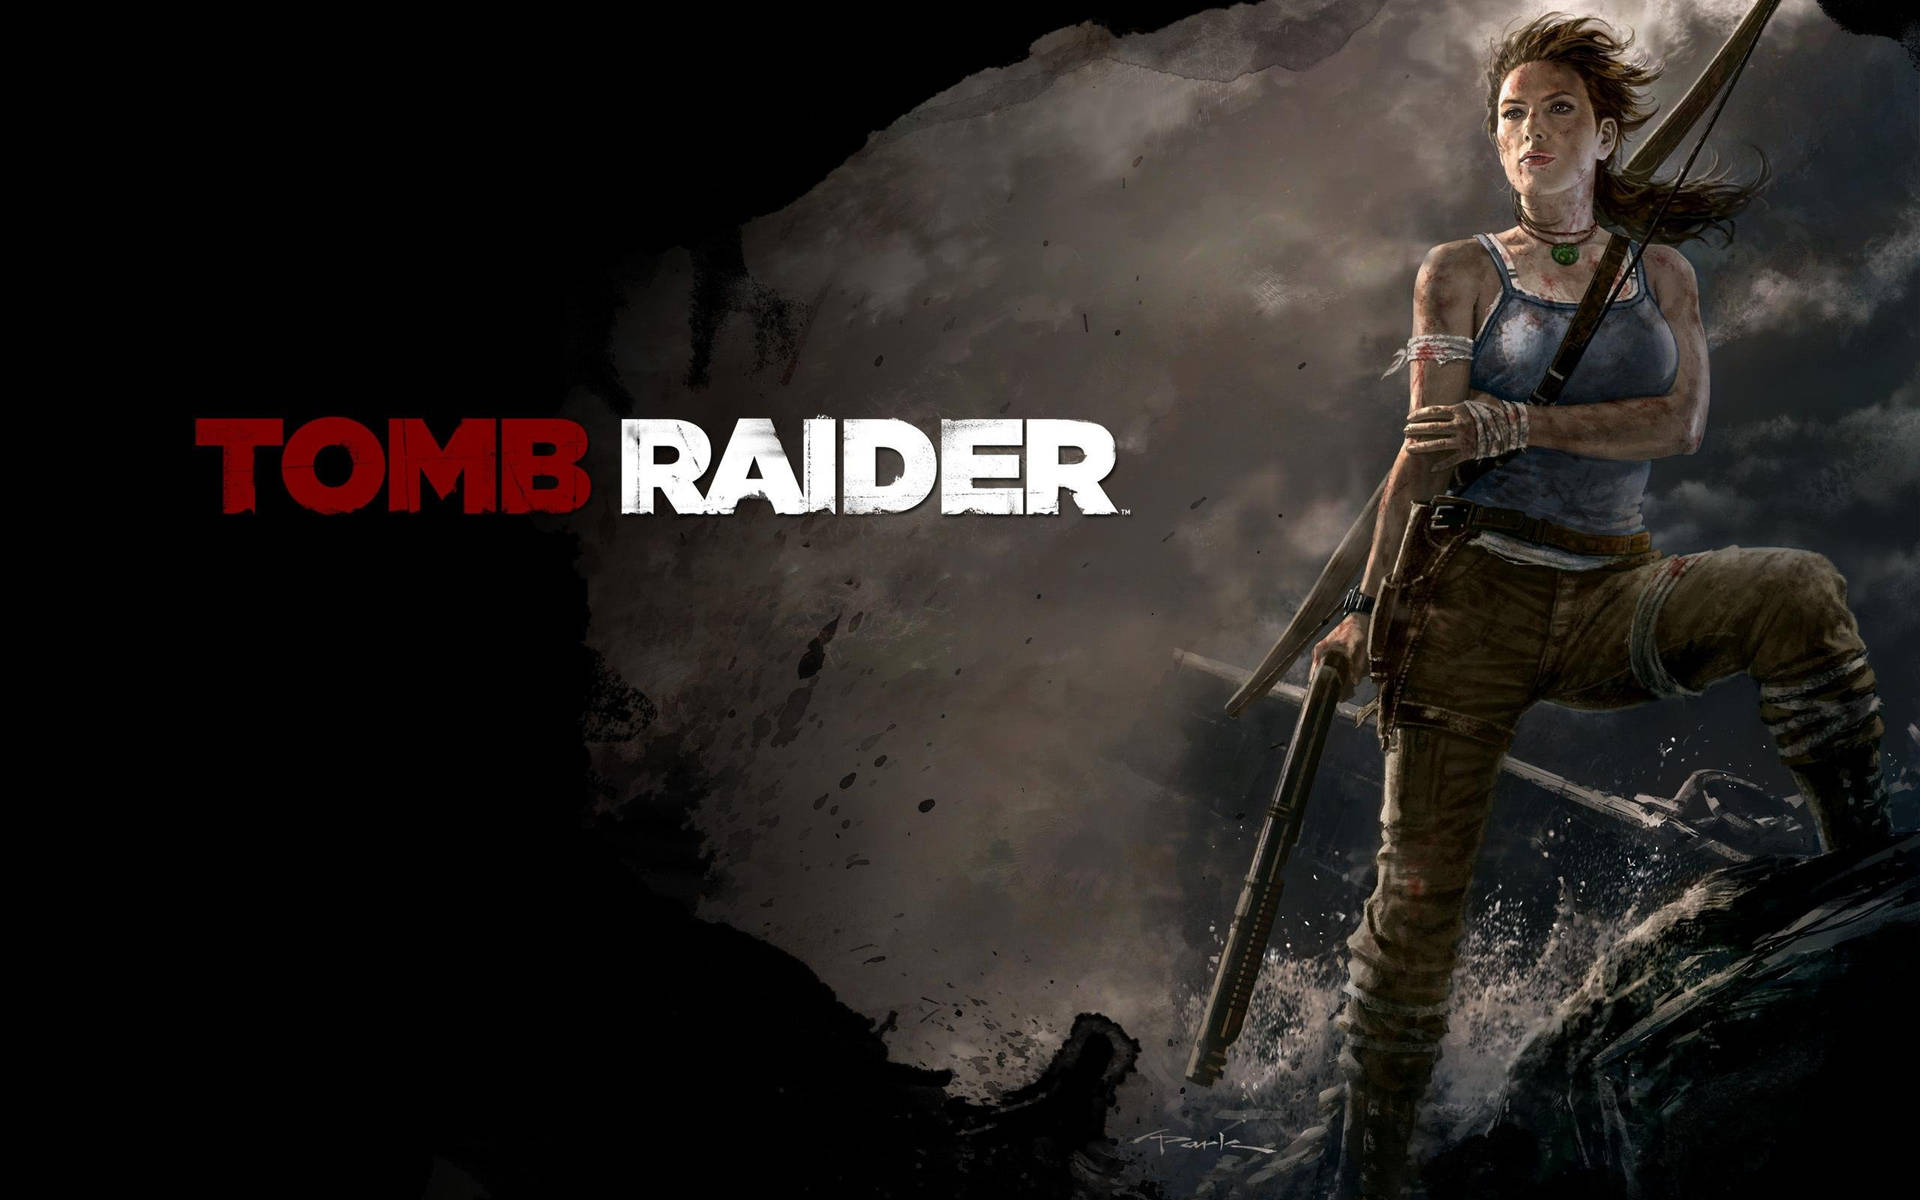 Tomb raider in steam фото 22